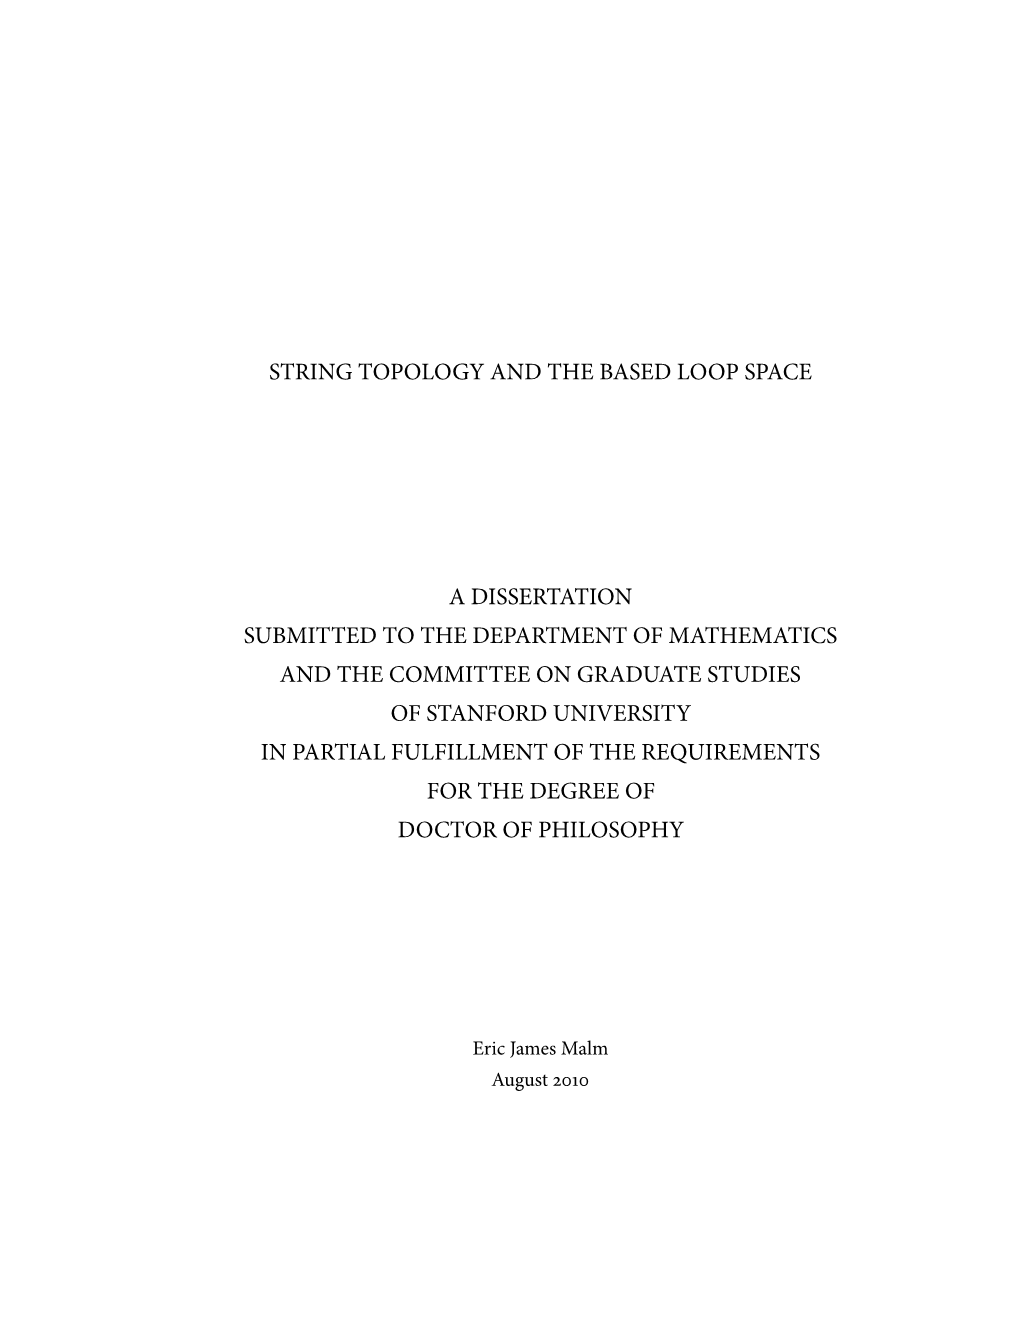 String Topology and the Based Loop Space a Dissertation Submitted to the Department of Mathematics and the Committee on Graduate